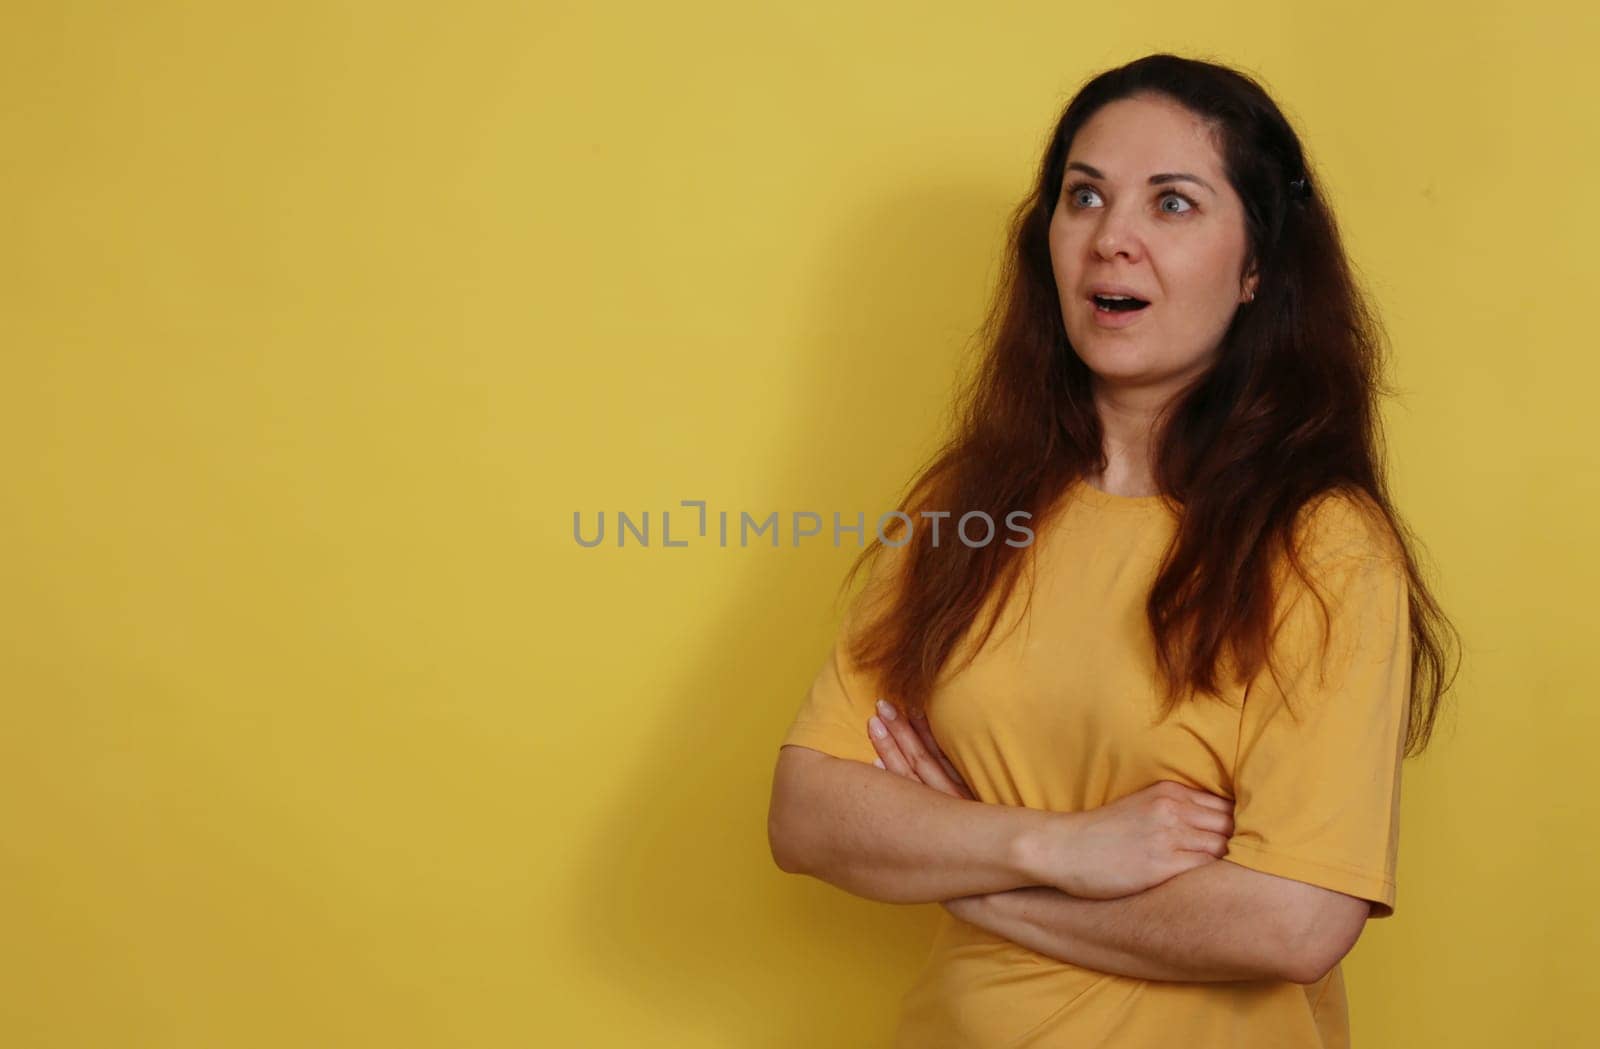 Close up portrait of a surprised woman in a yellow t-shirt on a studio background. by gelog67